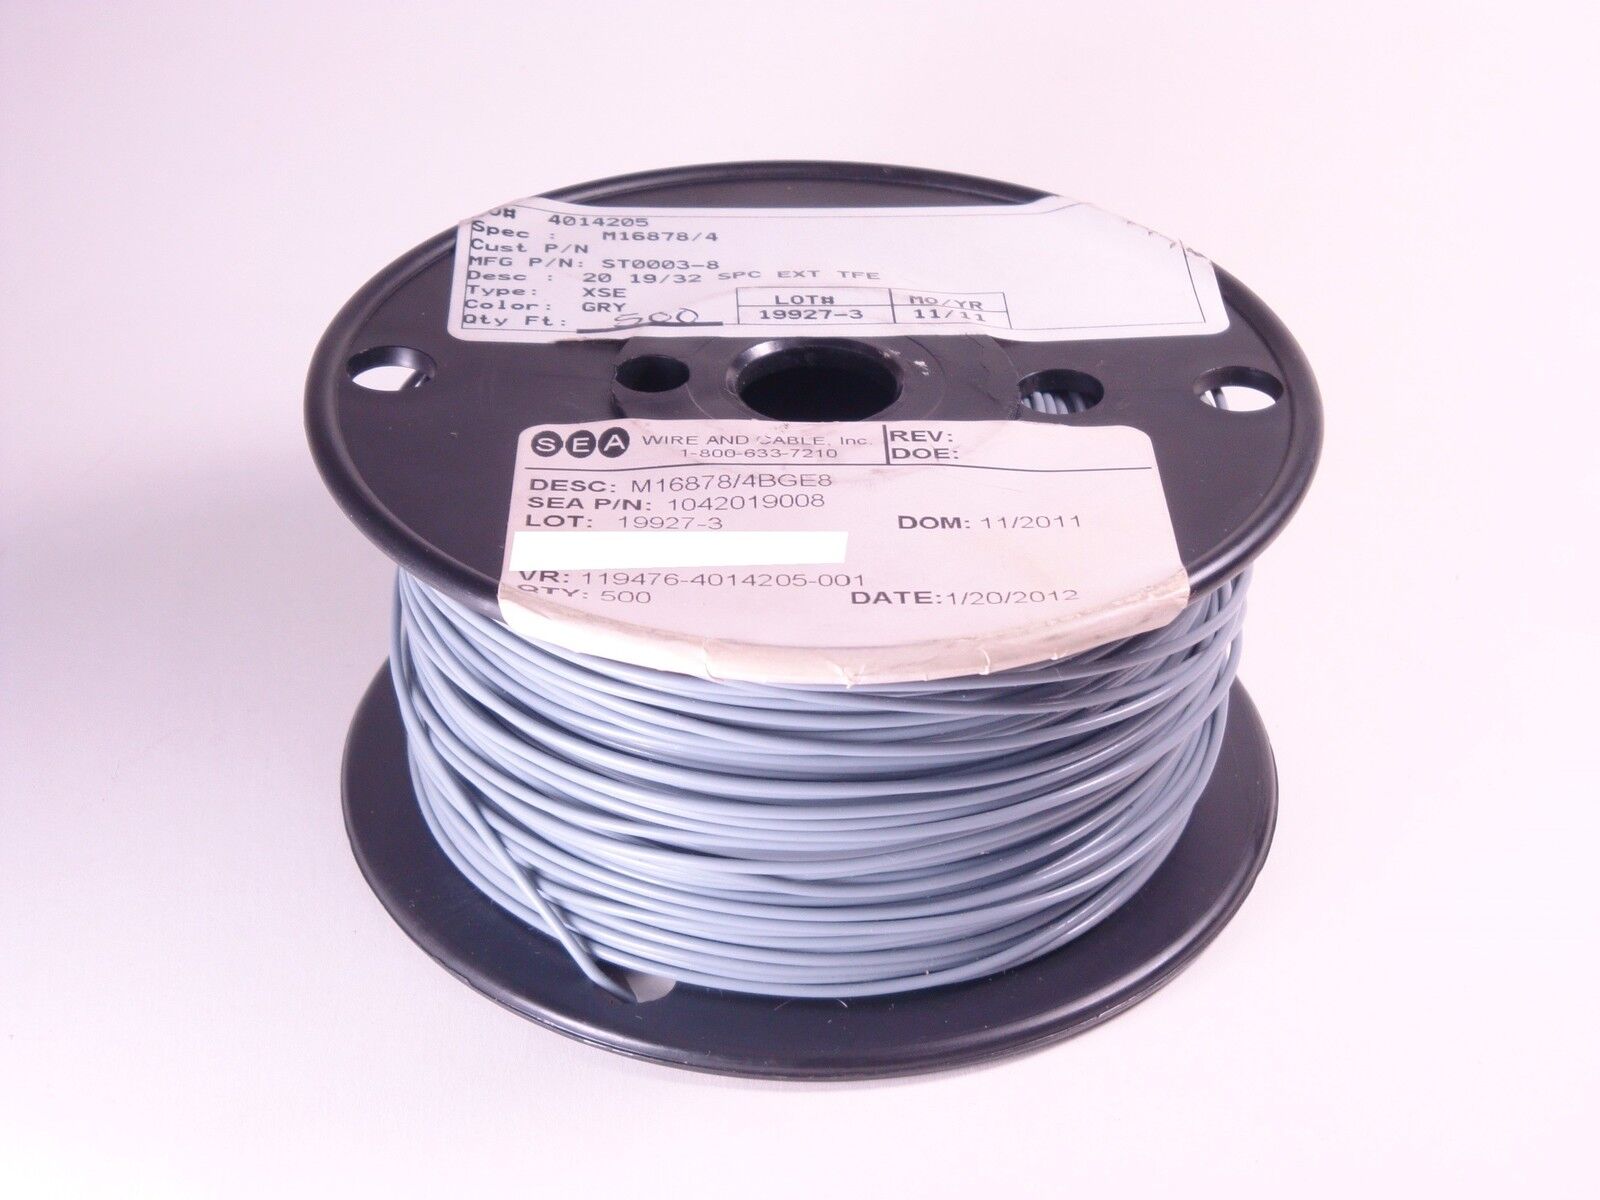 M16878/4BGE8 Harbour Extruded PTFE Hookup Wire 20 AWG 19 X 32 500' Gray Partial Tanio, tanio